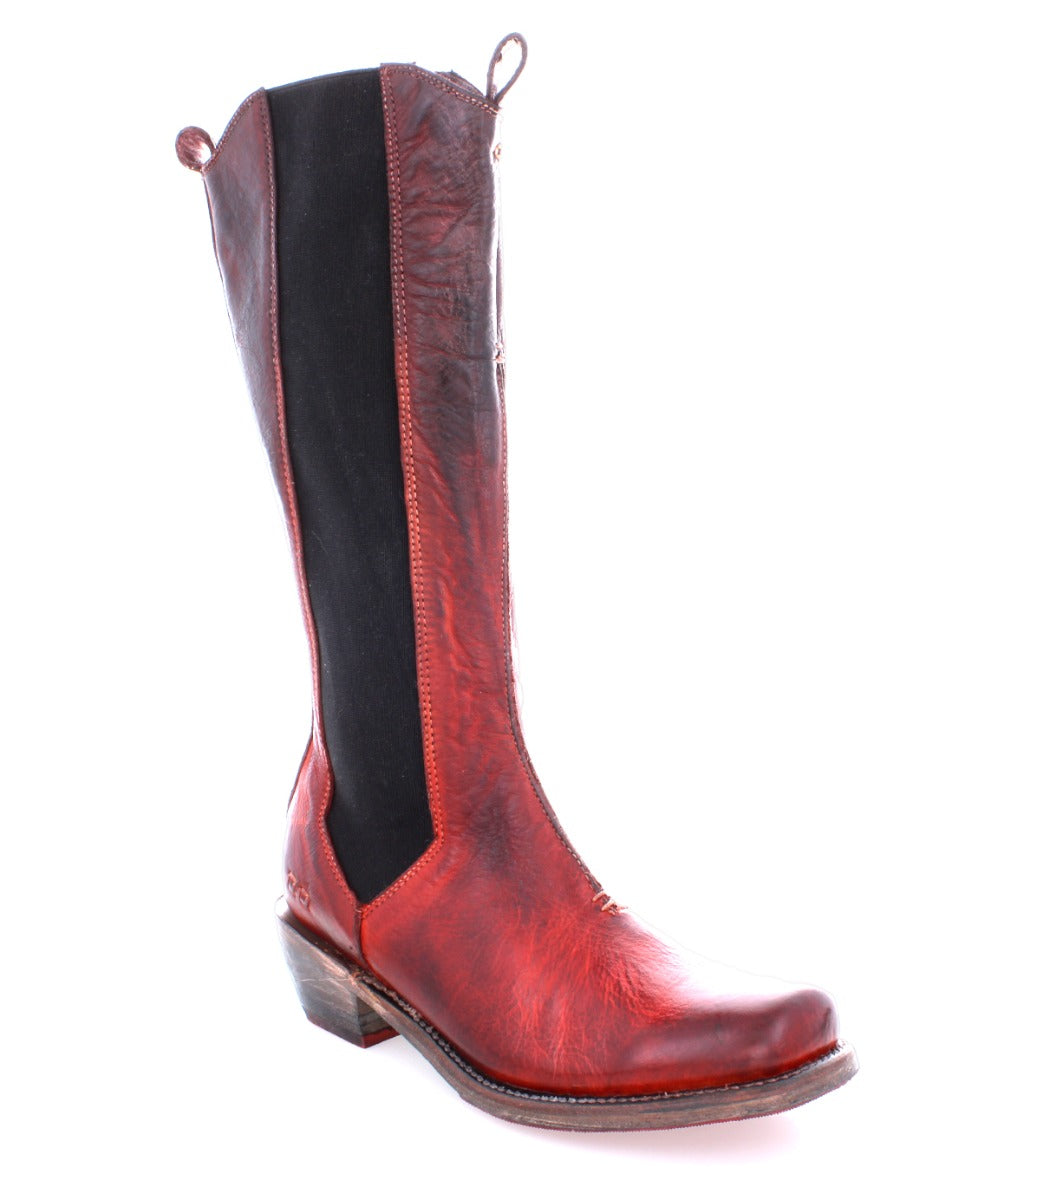 A Clarisse red leather boot with black soles. (Brand: Bed Stu)